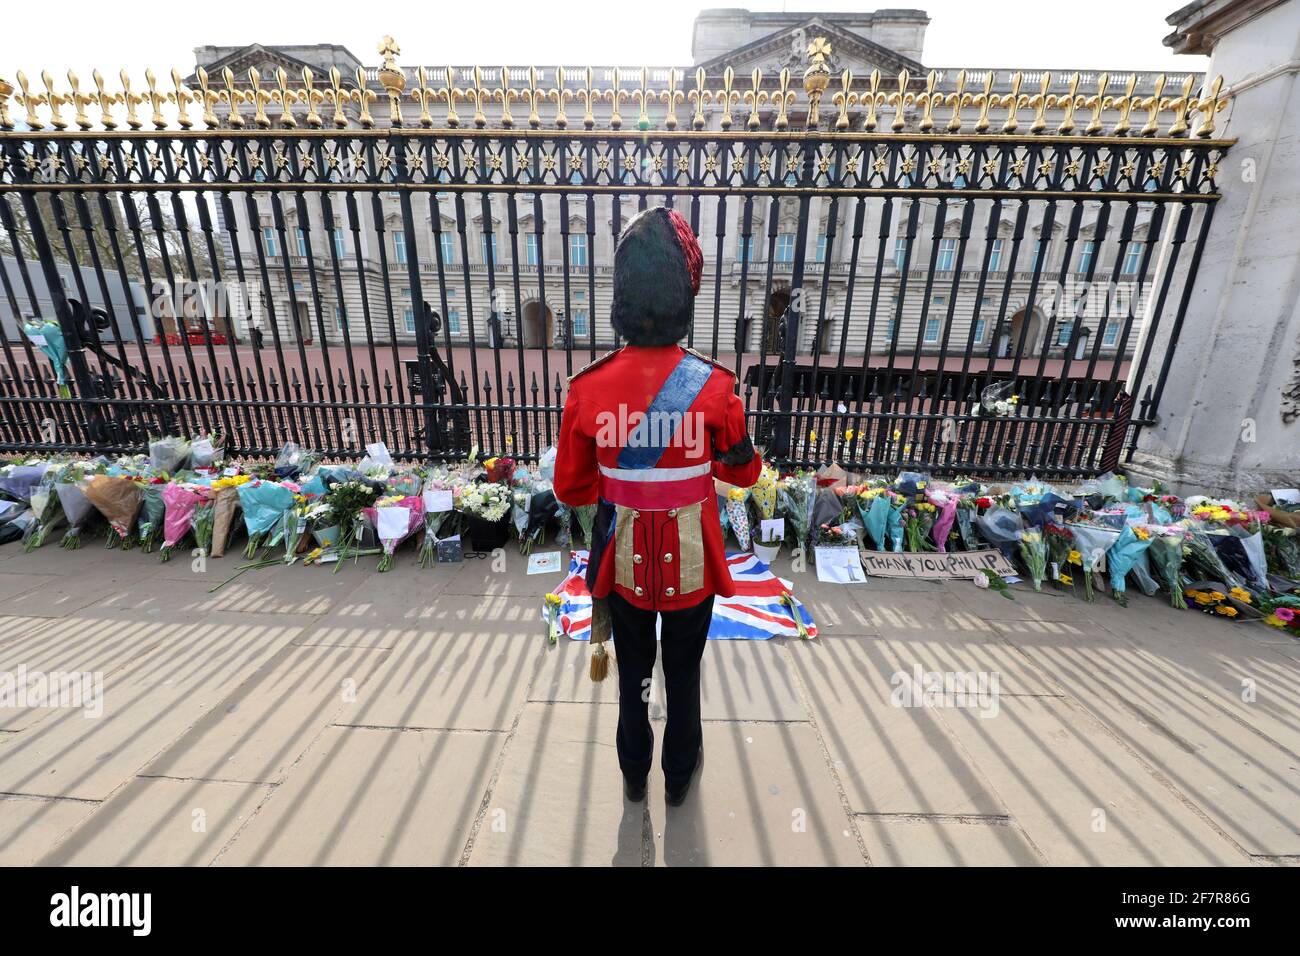 London, UK. 9th Apr, 2021. Floral tributes laid by people at Buckingham Palace after the announcement of the death of Prince Philip Credit: Paul Brown/Alamy Live News Stock Photo